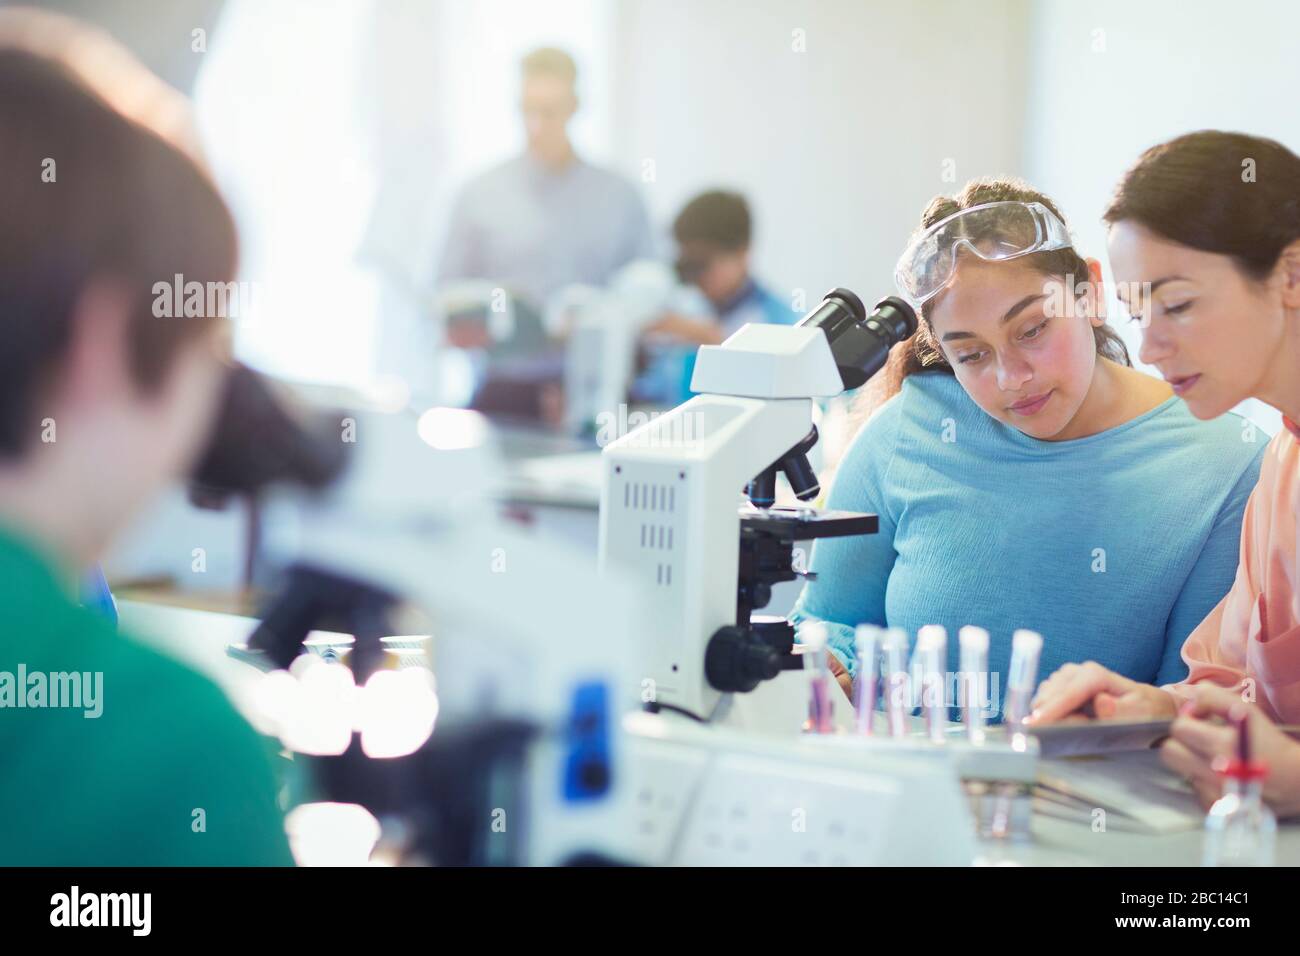 Female teacher and girl student conducting scientific experiment at microscope in laboratory classroom Stock Photo